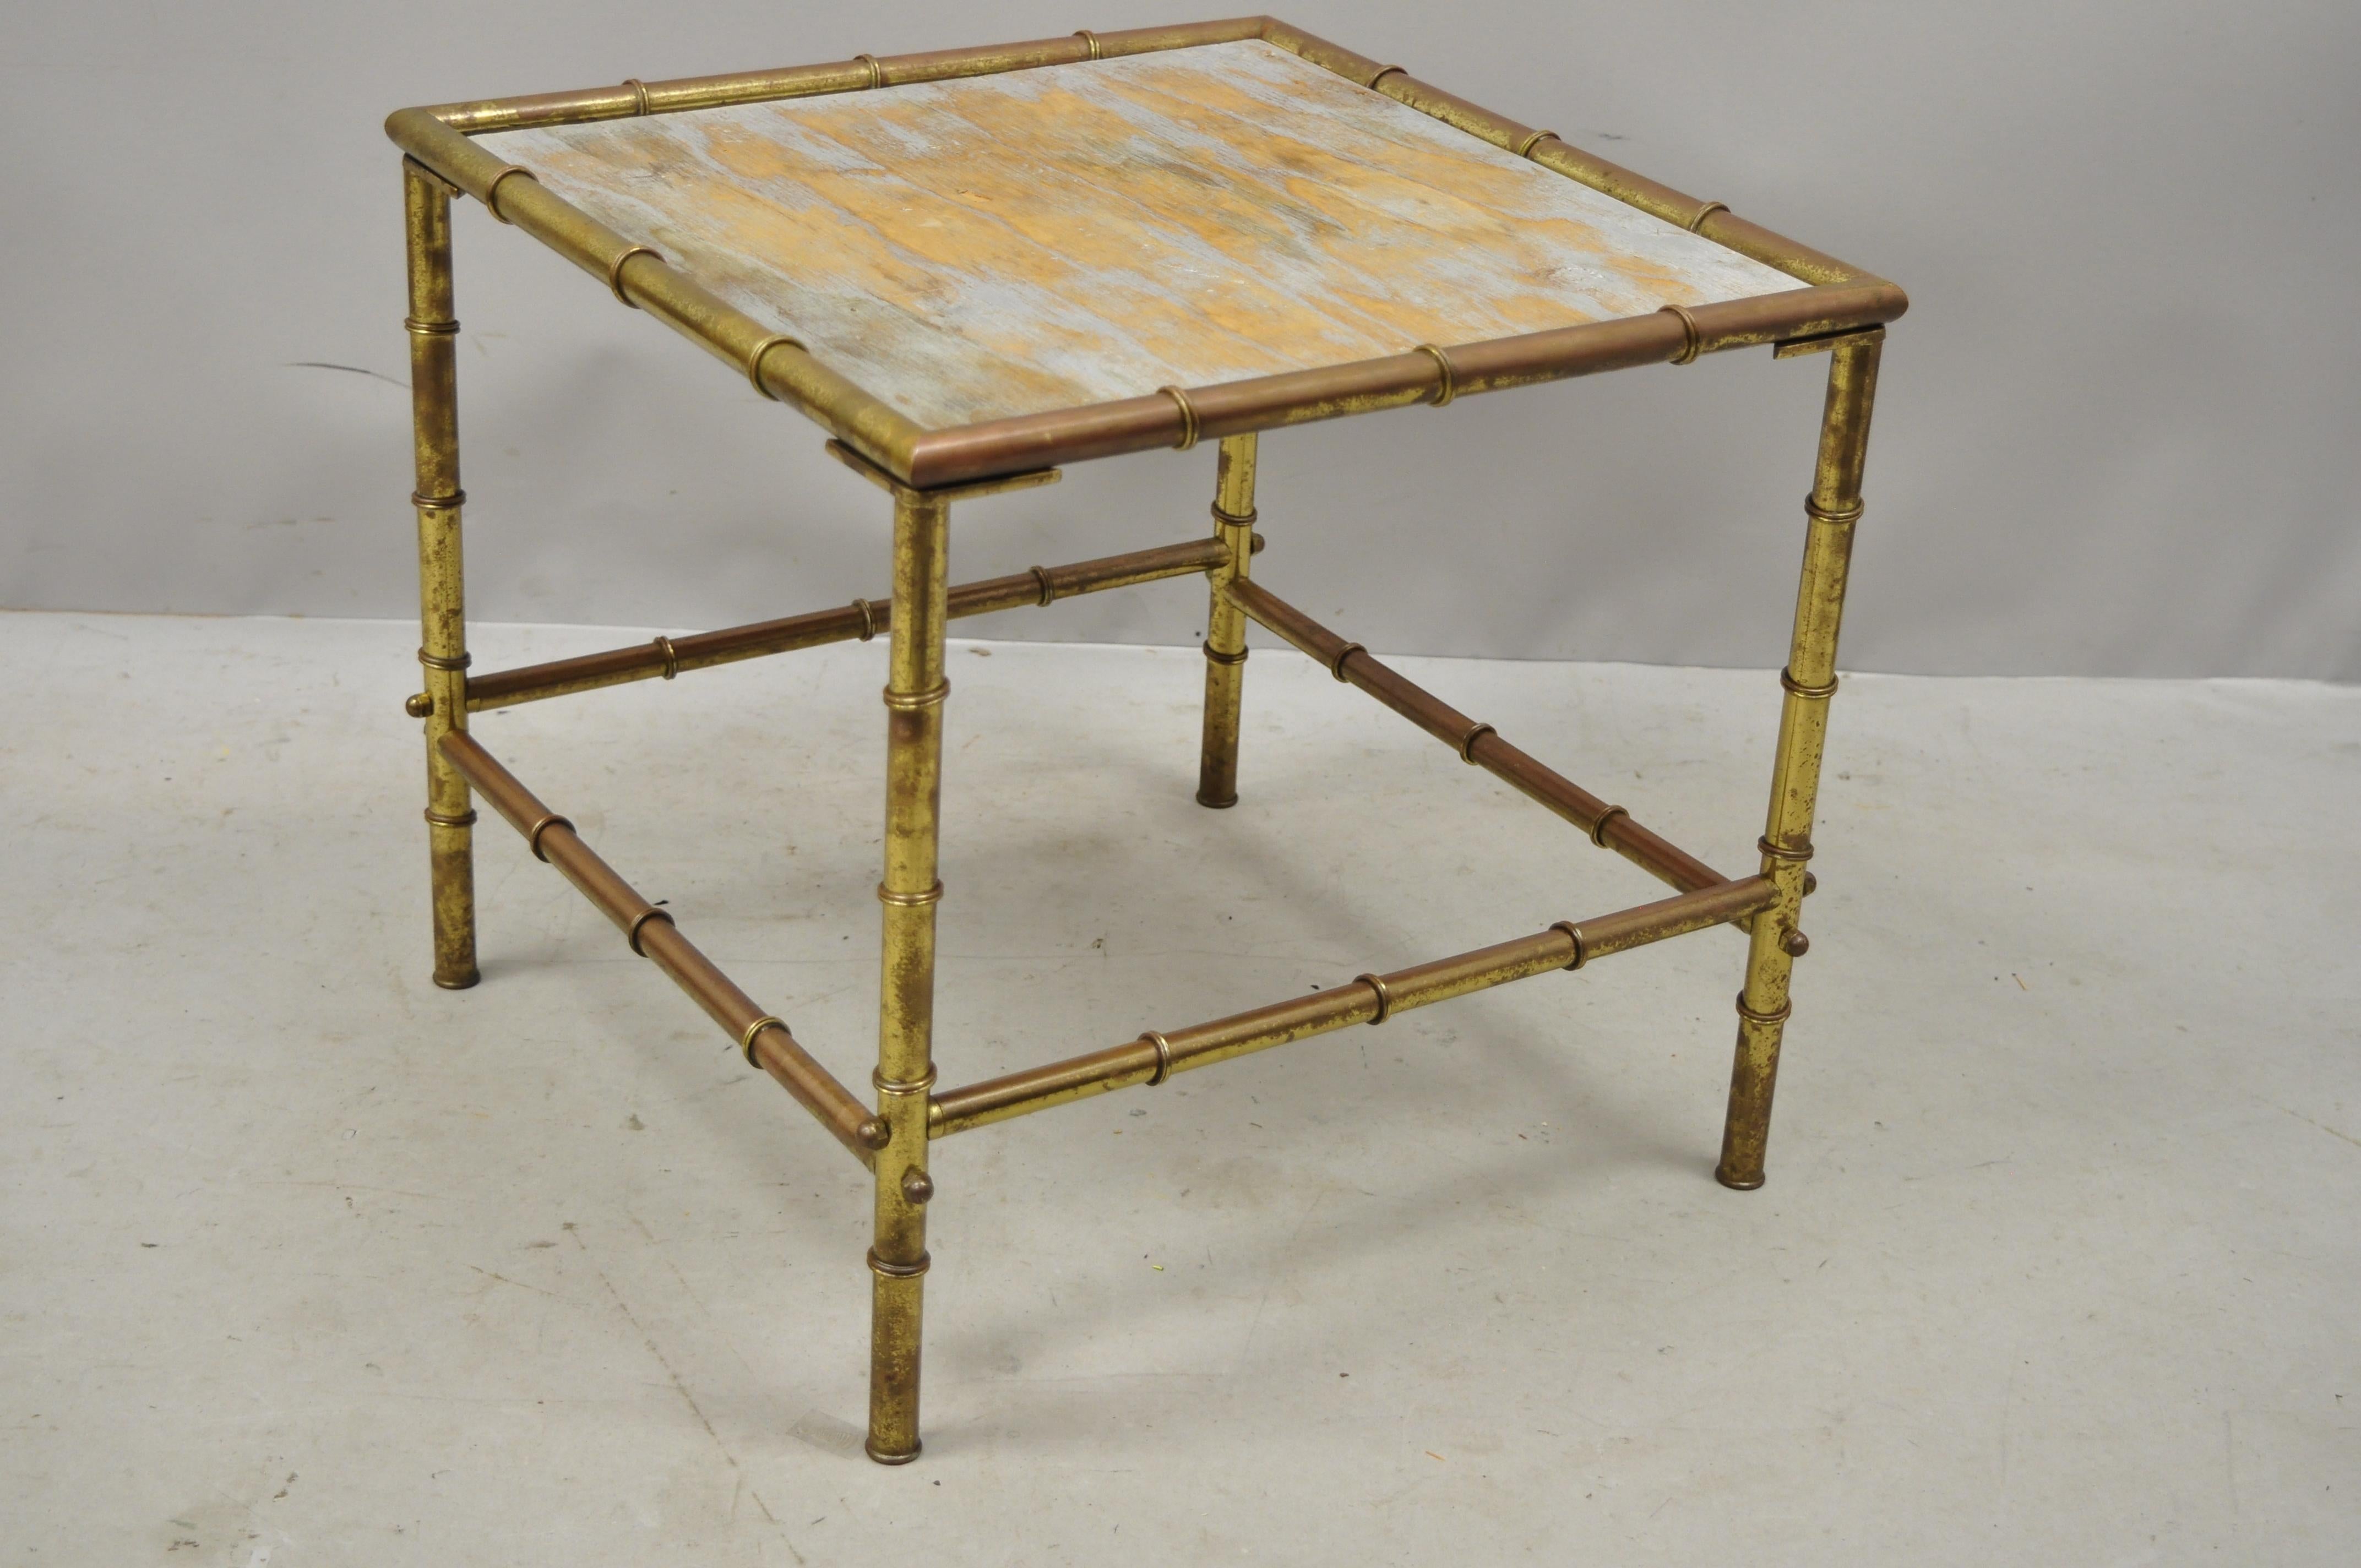 Italian Hollywood Regency faux bamboo brass tole metal low square side table, circa early to mid-20th century. Measurements: 16